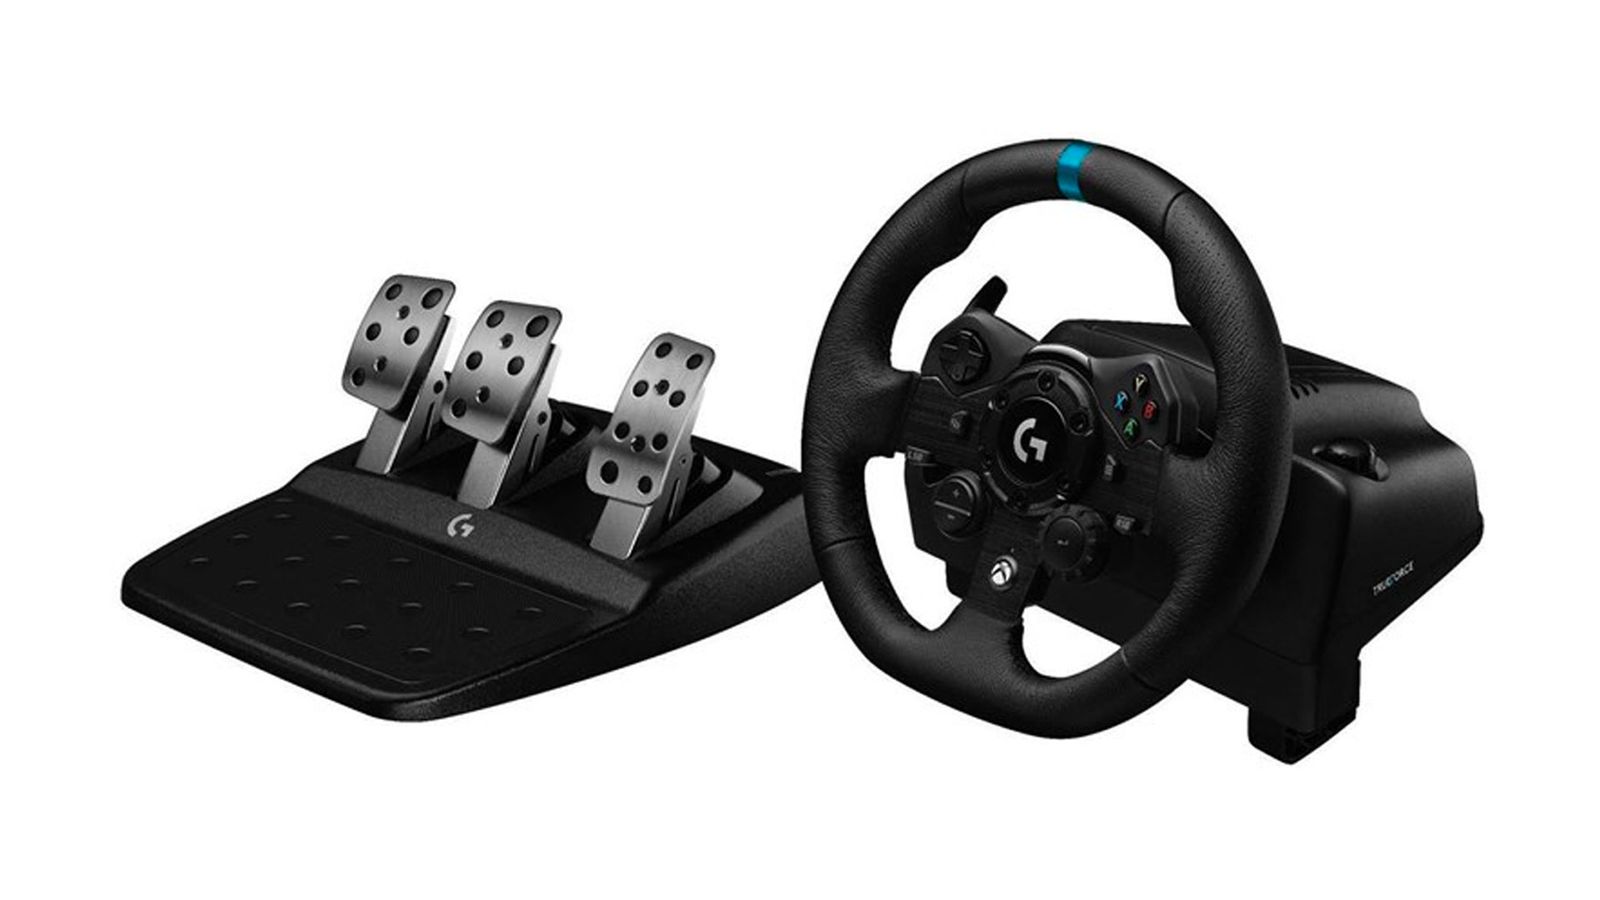 Logitech G293 product image of a black sim racing wheel with a blue line on the rim next to a set of metal pedals.